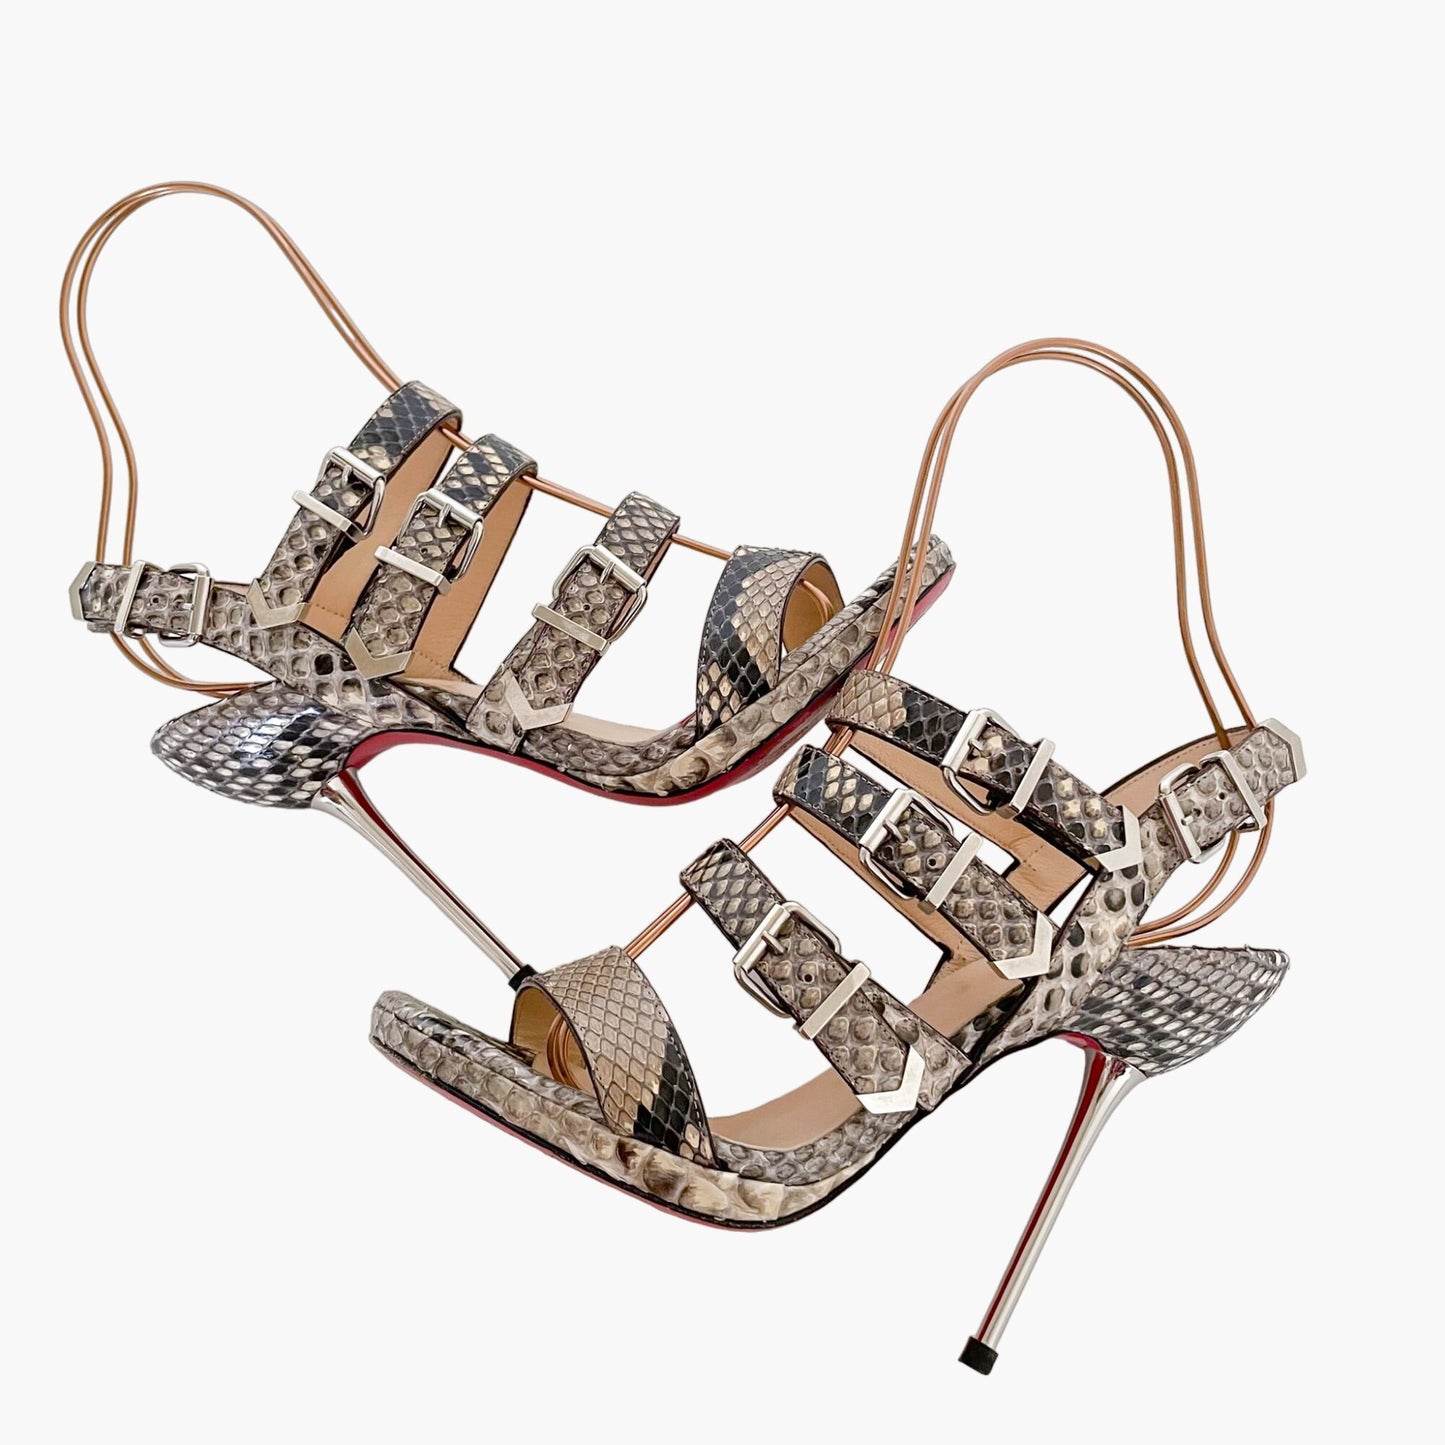 Christian Louboutin Funky 120 Sandals in Snake Print Size 37.5